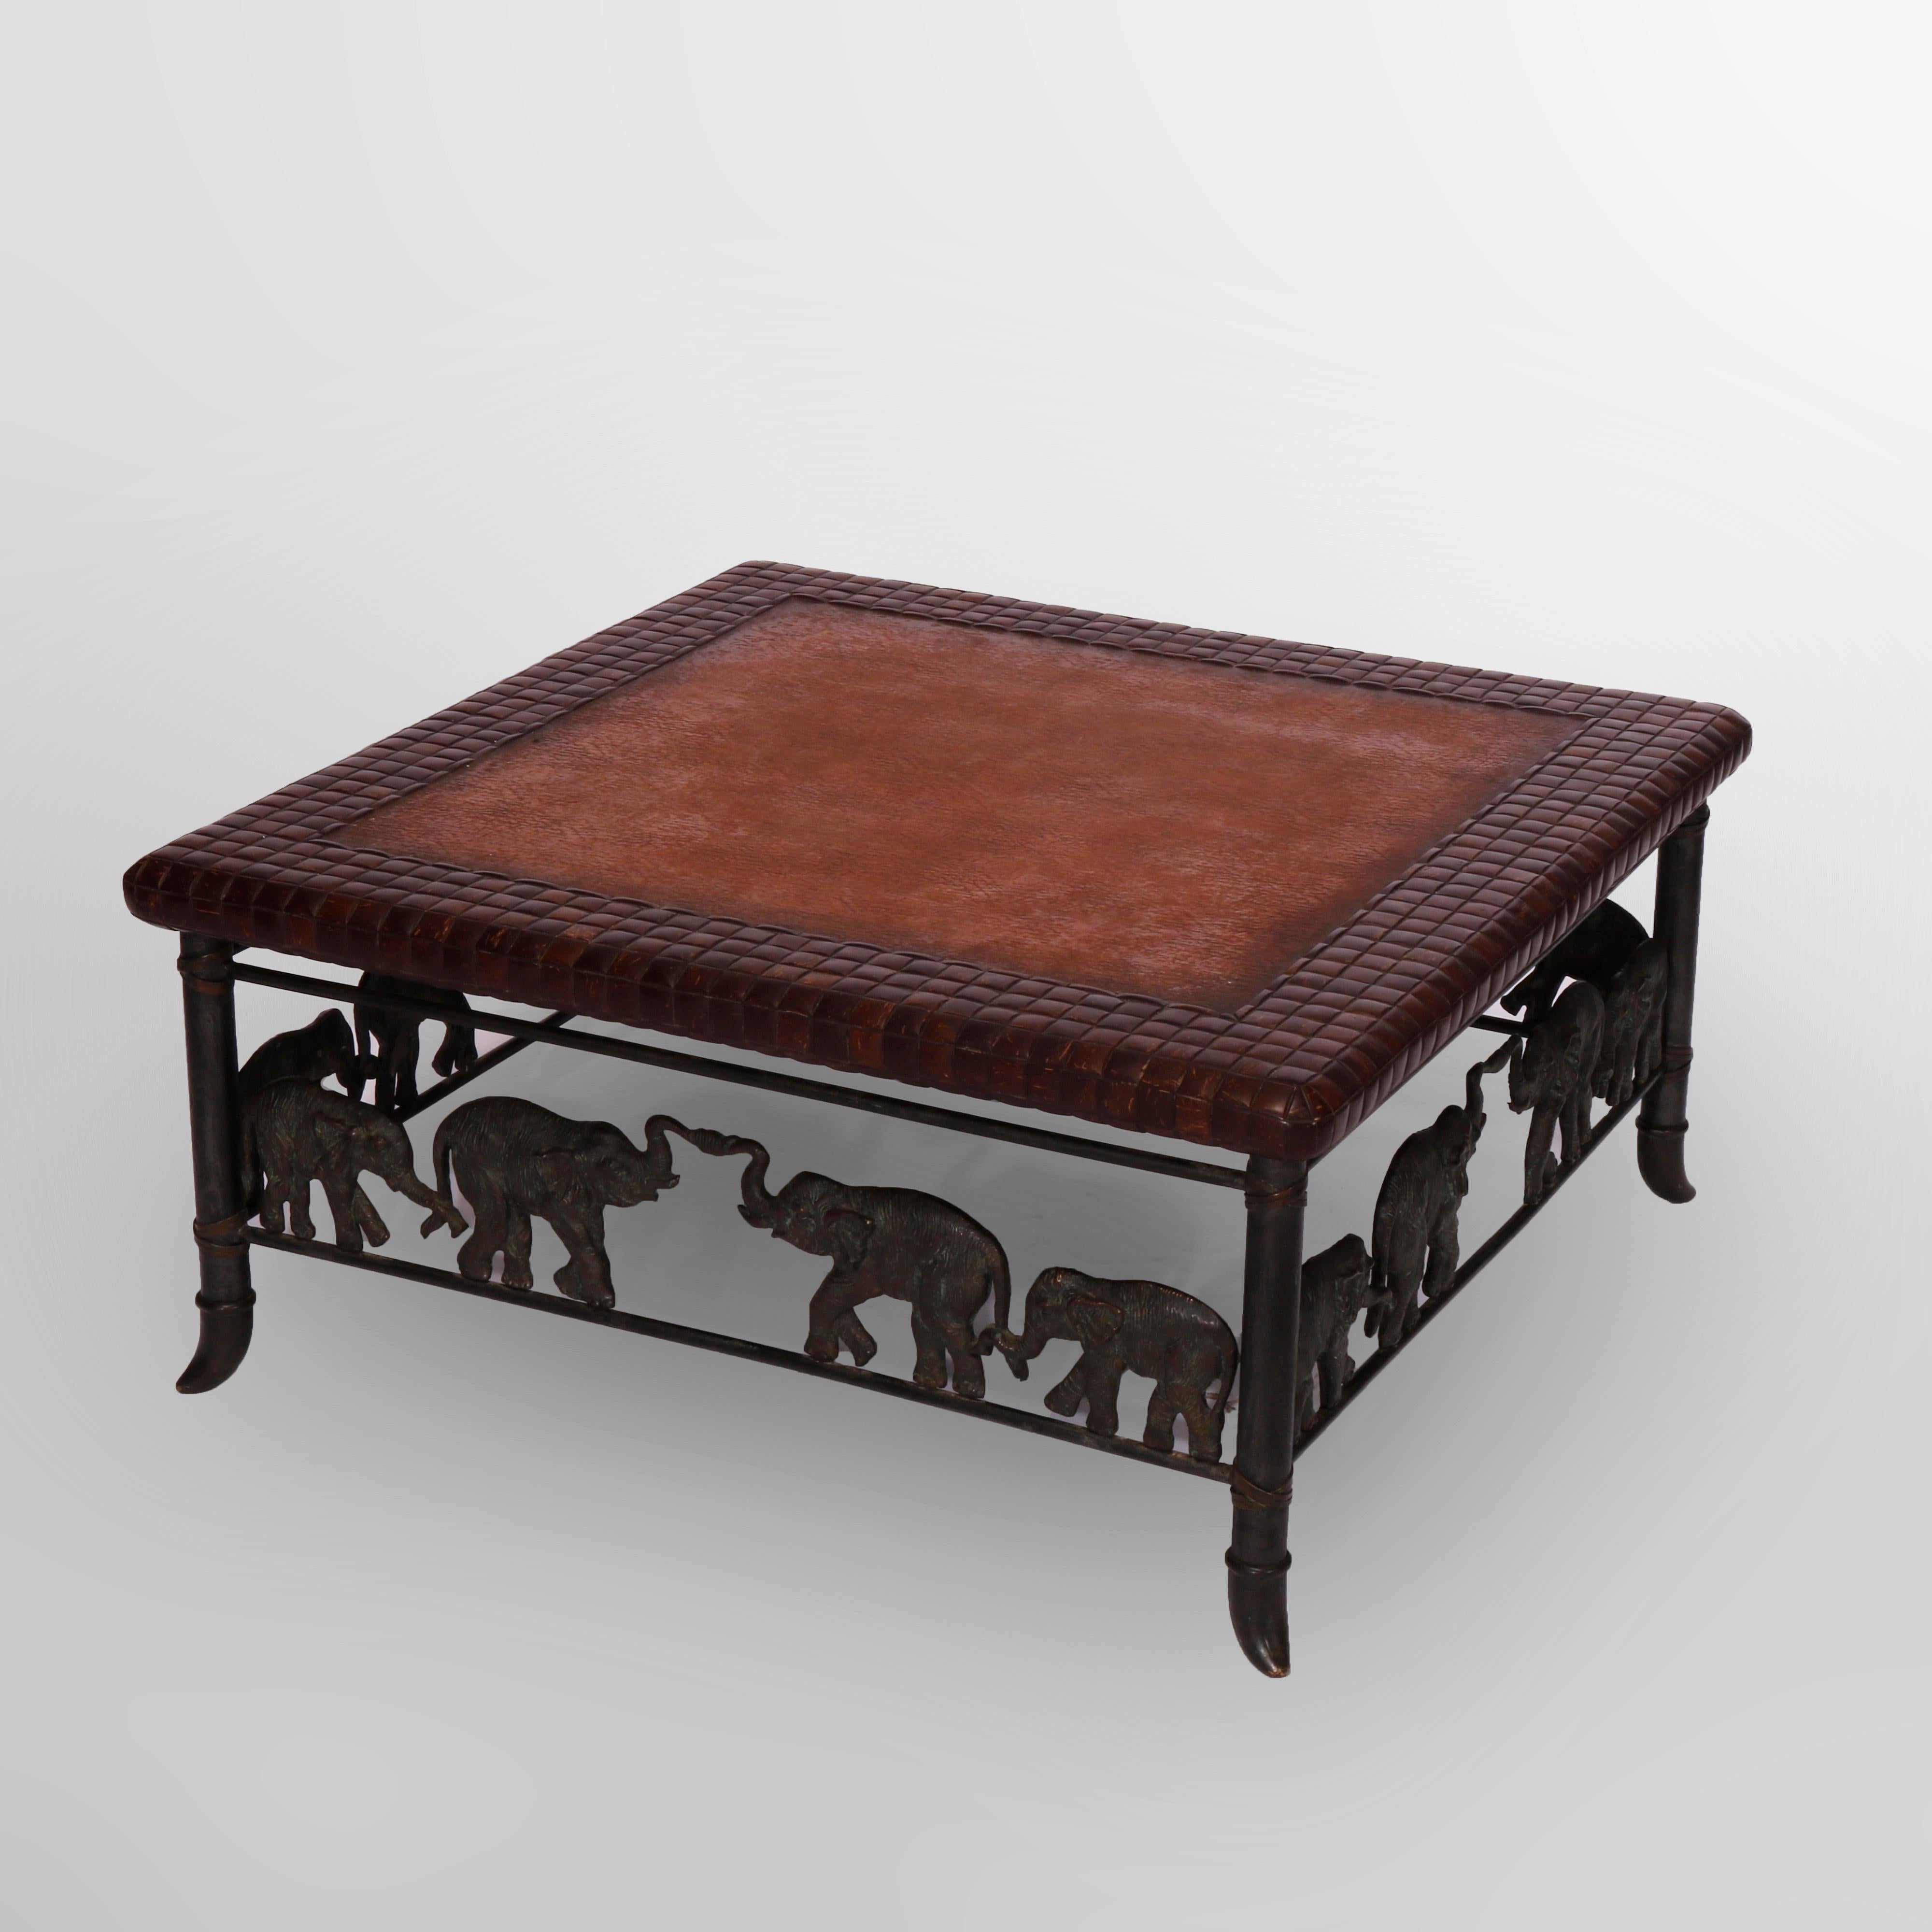 A figural low table by Maitland Smith offers leather top over cast bronze frame having stretchers with elephants, maker label as photographed, 20th century

Measures - 17.5'' H x 37.25'' W x 37.25'' D.

Catalogue Note: Ask about DISCOUNTED DELIVERY